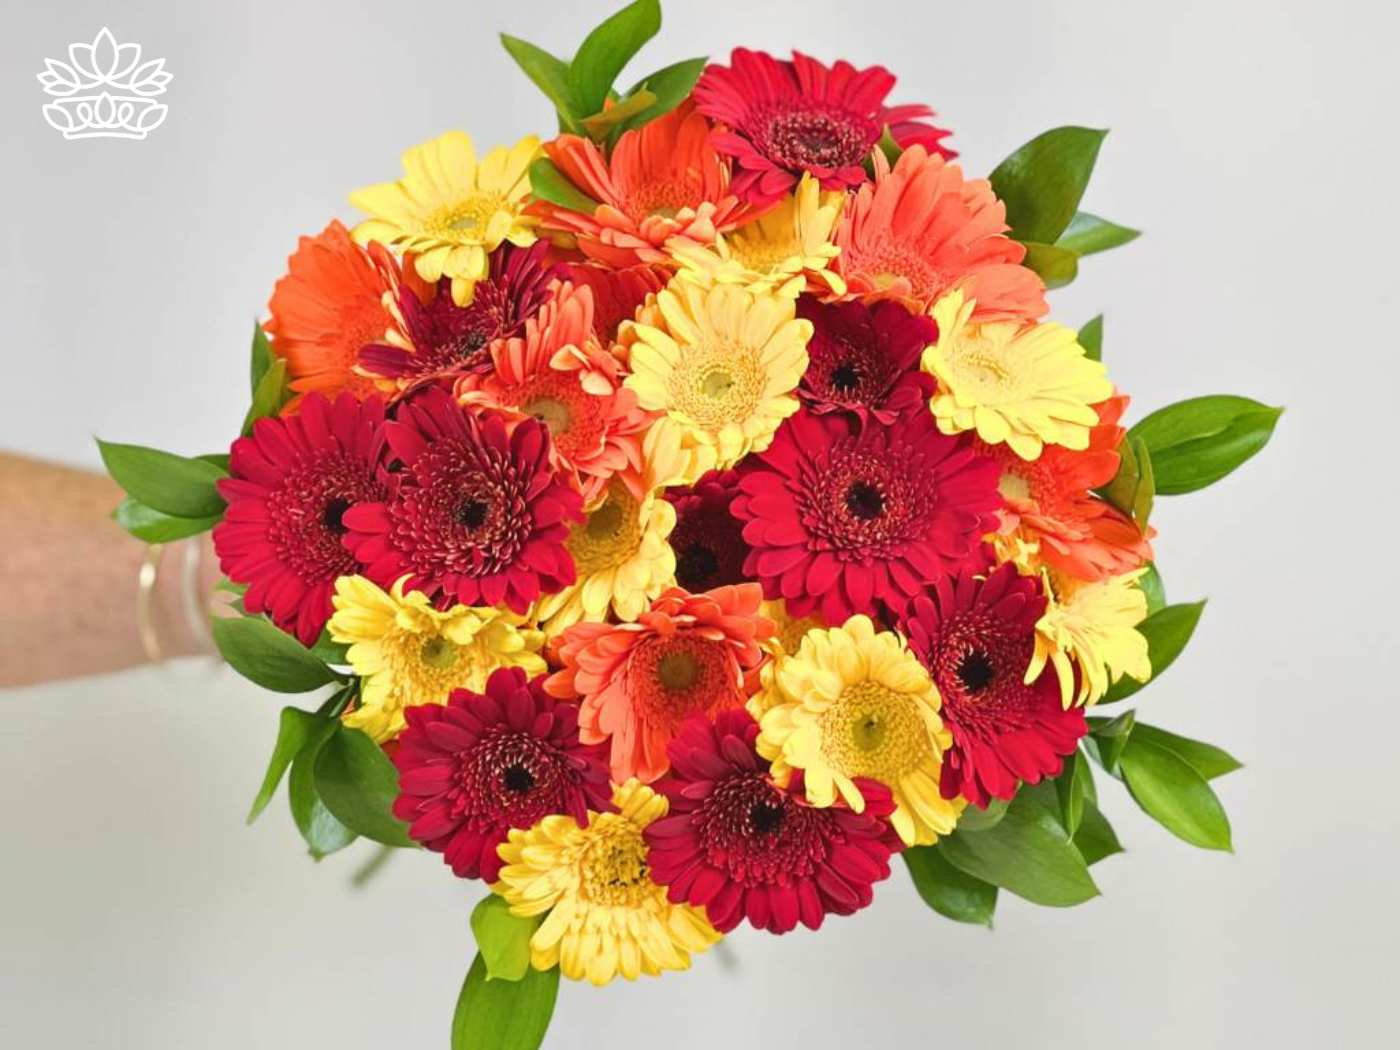 A vibrant bouquet of Gerbera daisies in shades of red, orange, and yellow, complemented by lush green foliage. Fabulous Flowers and Gifts. Gerberas Collection. Delivered with Heart.